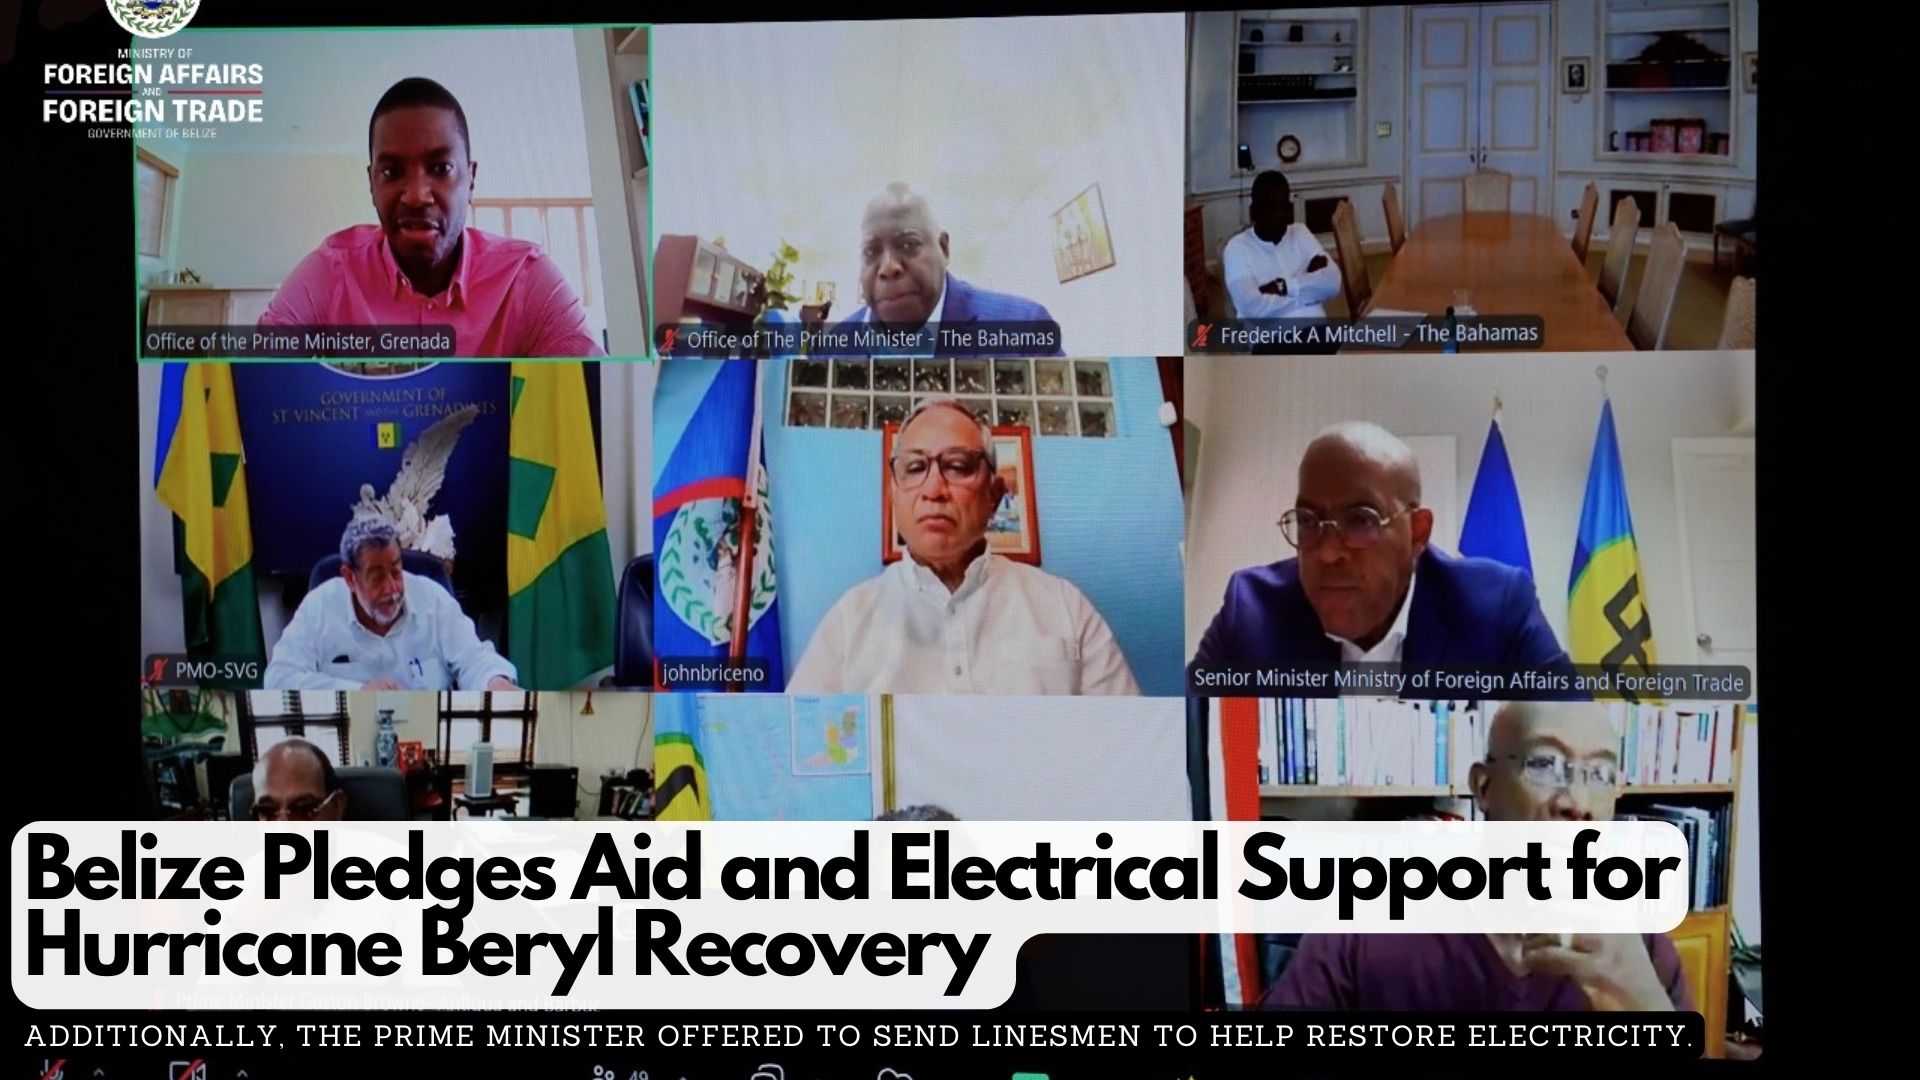 Belize Pledges Aid and Electrical Support for Hurricane Beryl Recovery